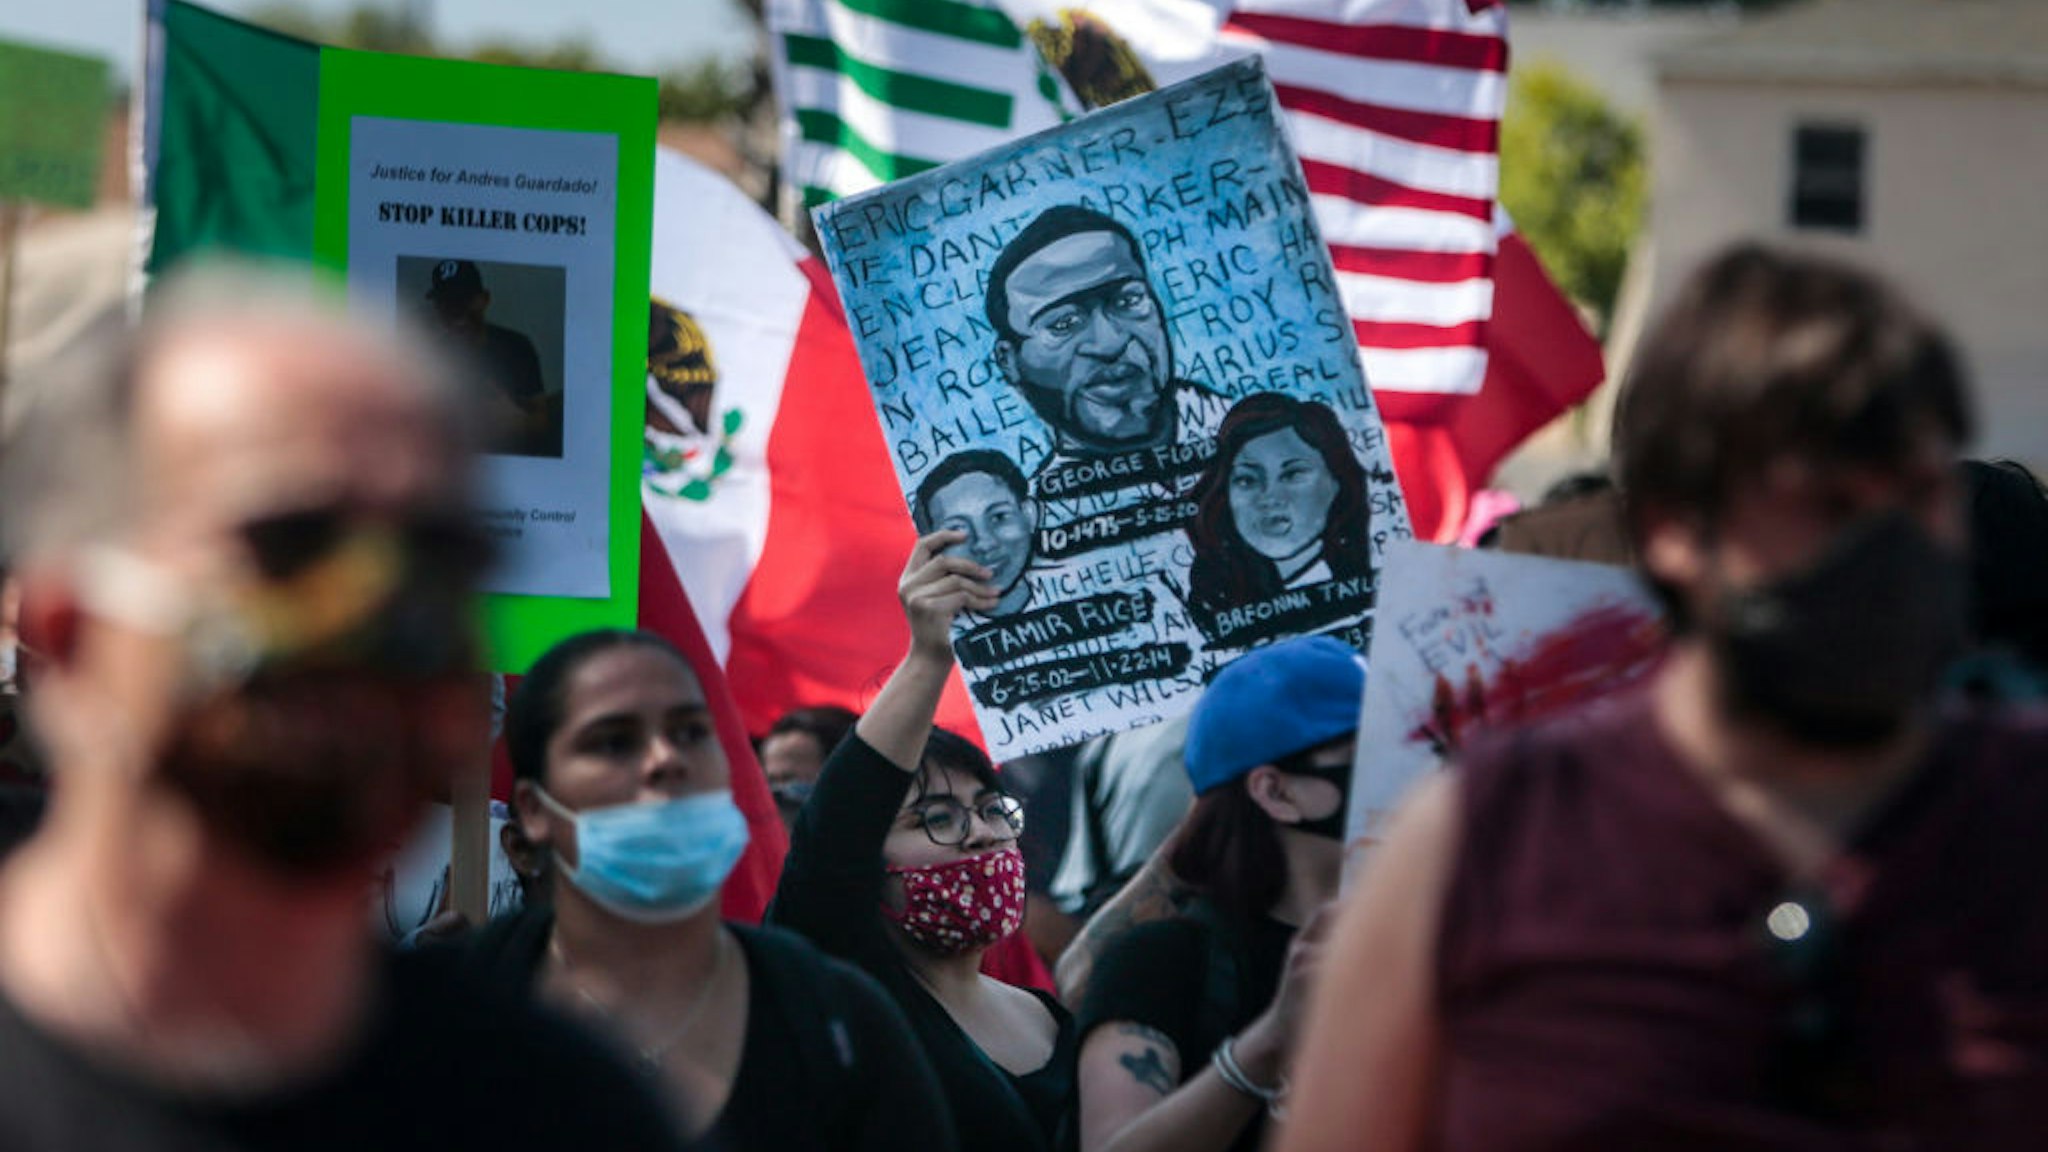 Hundreds of people rallied and marched to the Compton Sheriffs' Office in protest for the shooting of Andres Guardado, security guard who was fatally shot by a Los Angeles County sheriff's deputy on Sunday, June 21, 2020 in Gardena, California. (Jason Armond / Los Angeles Times via Getty Images)